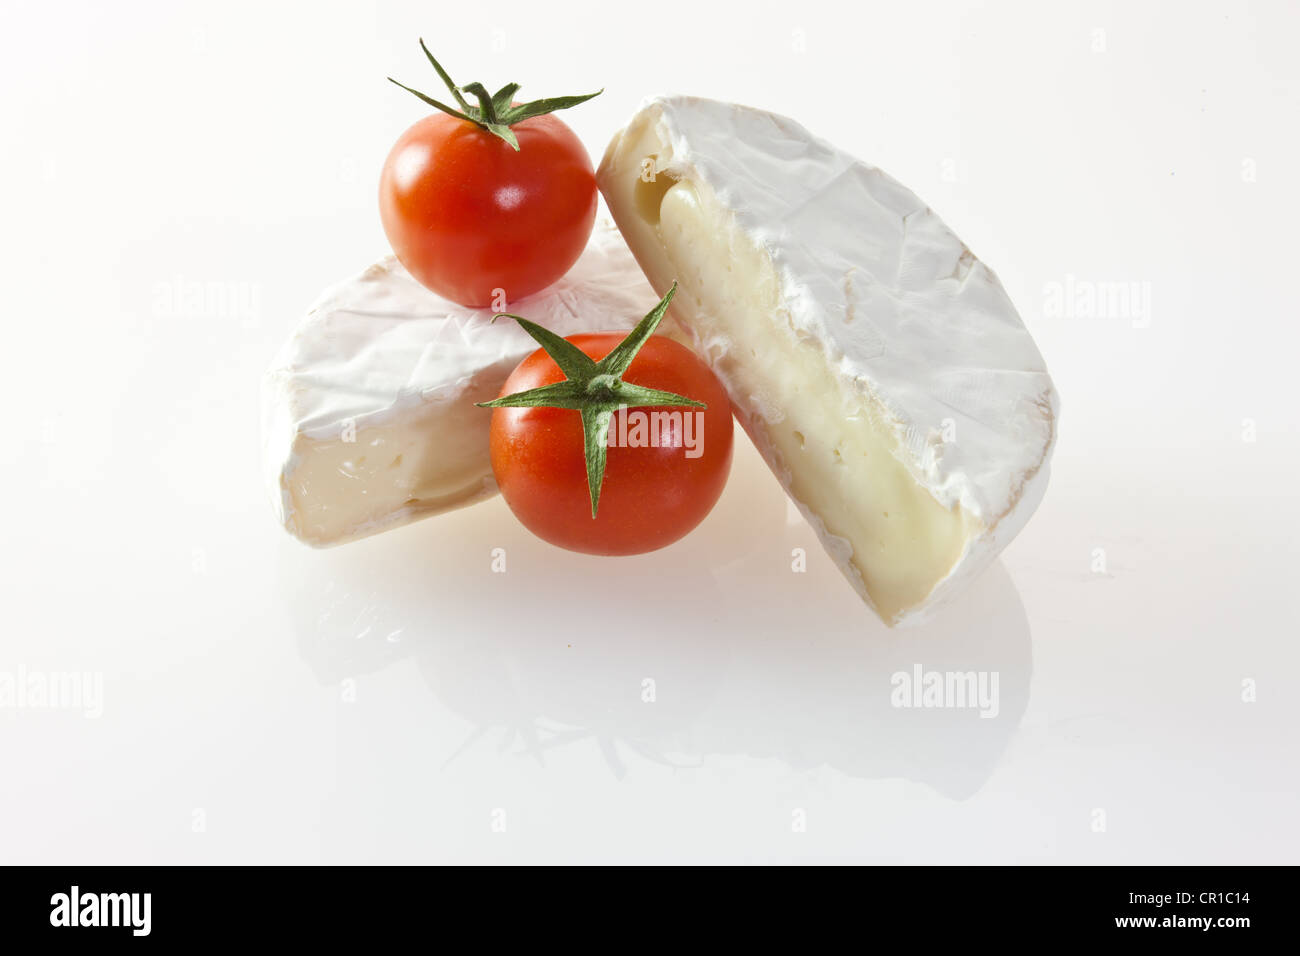 Camembert cheese with tomatoes Stock Photo